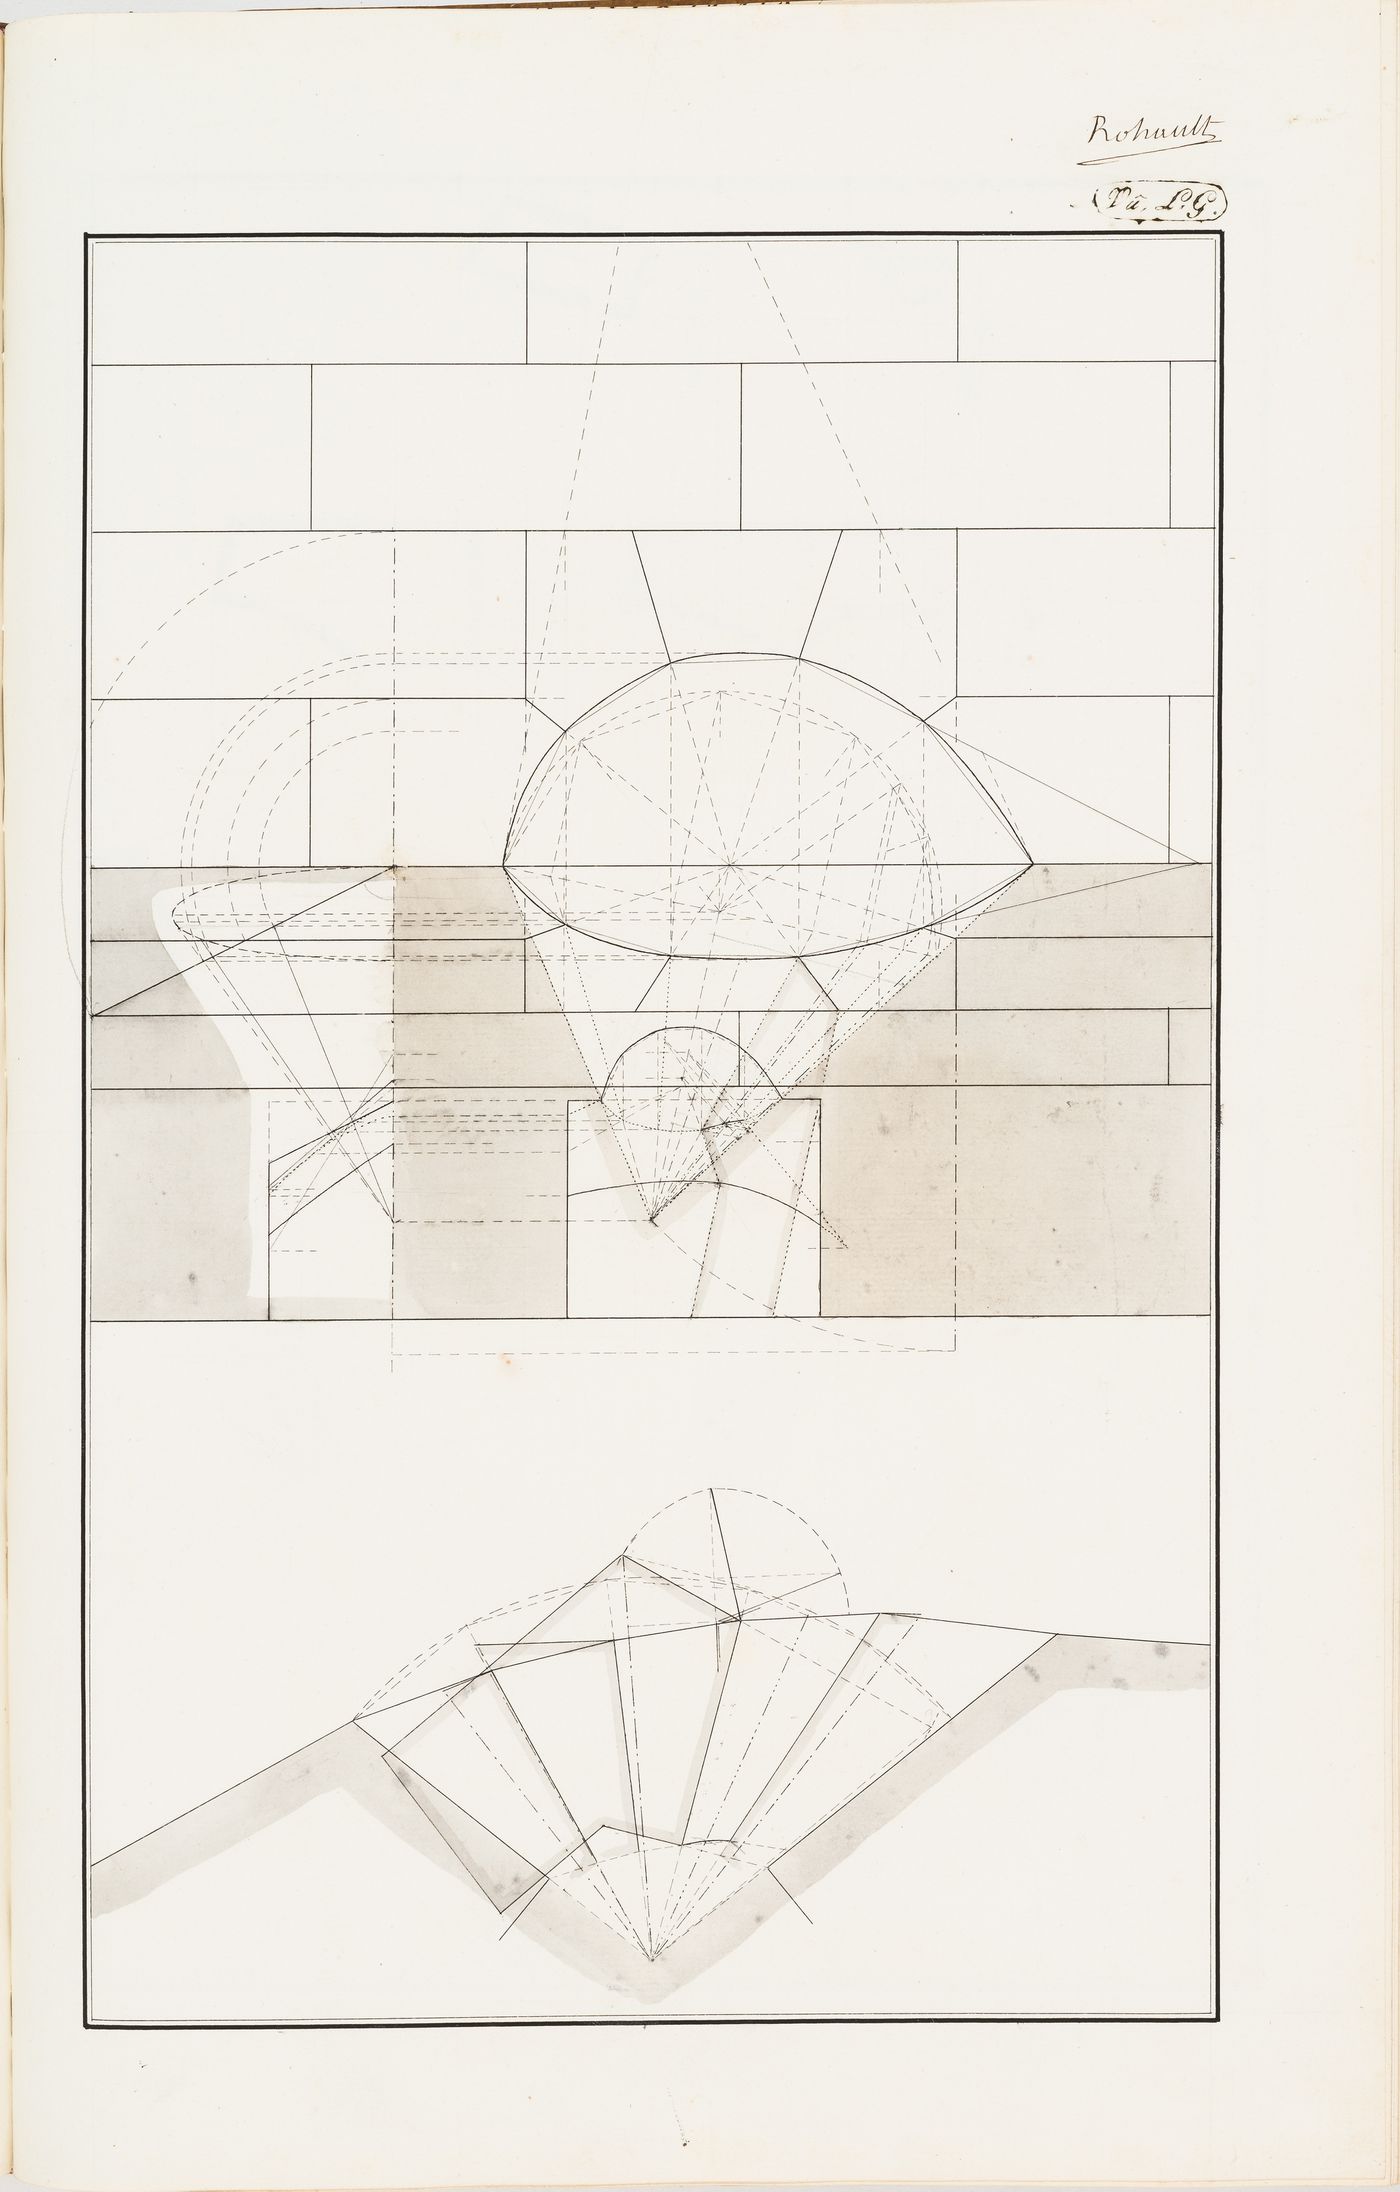 Geometry exercise, possibly for constructing an arch